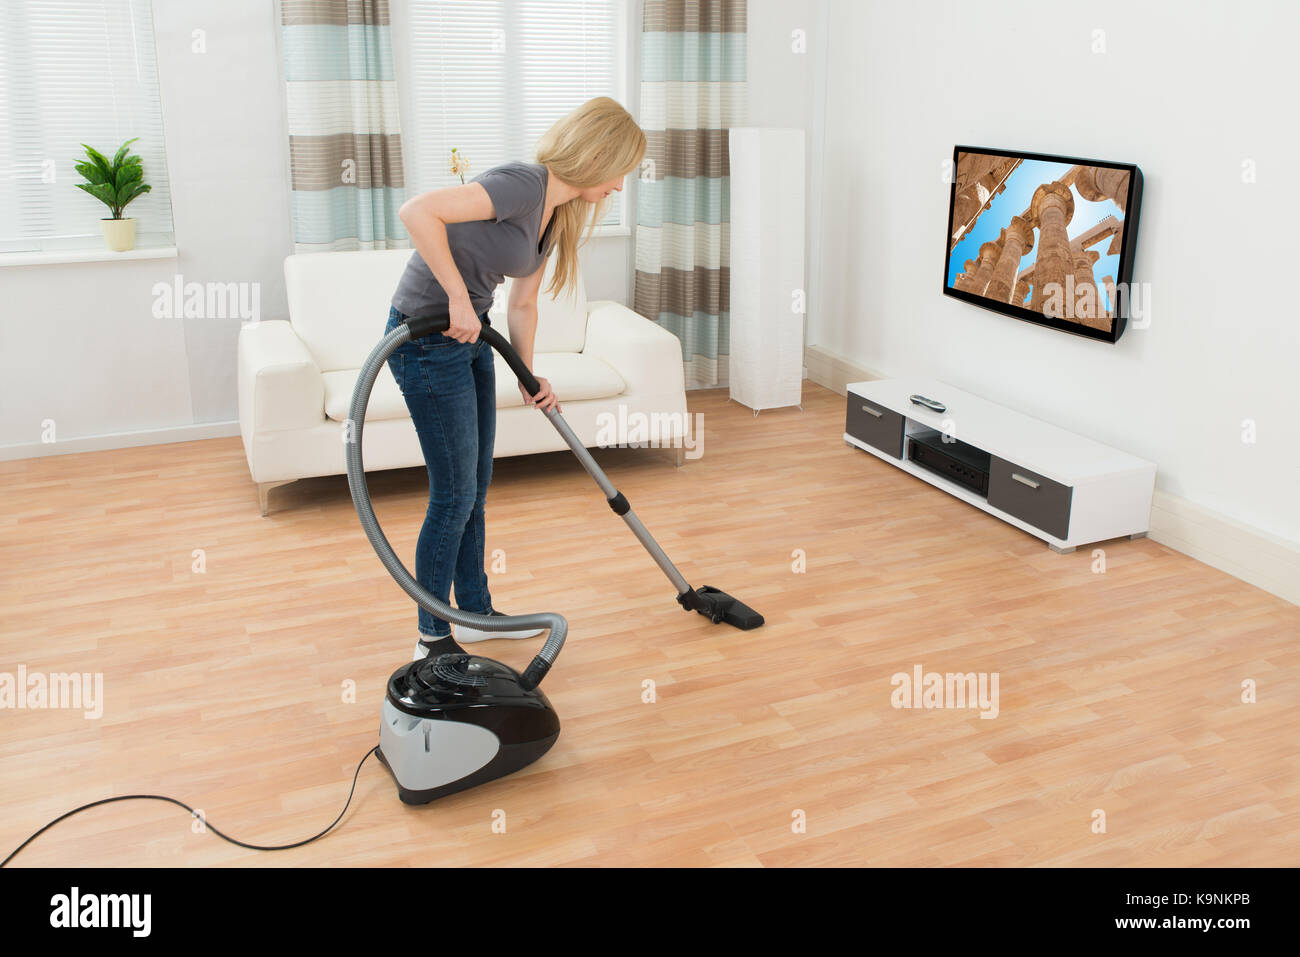 Young Woman Cleaning Floor With Vacuum Cleaner At Home Stock Photo